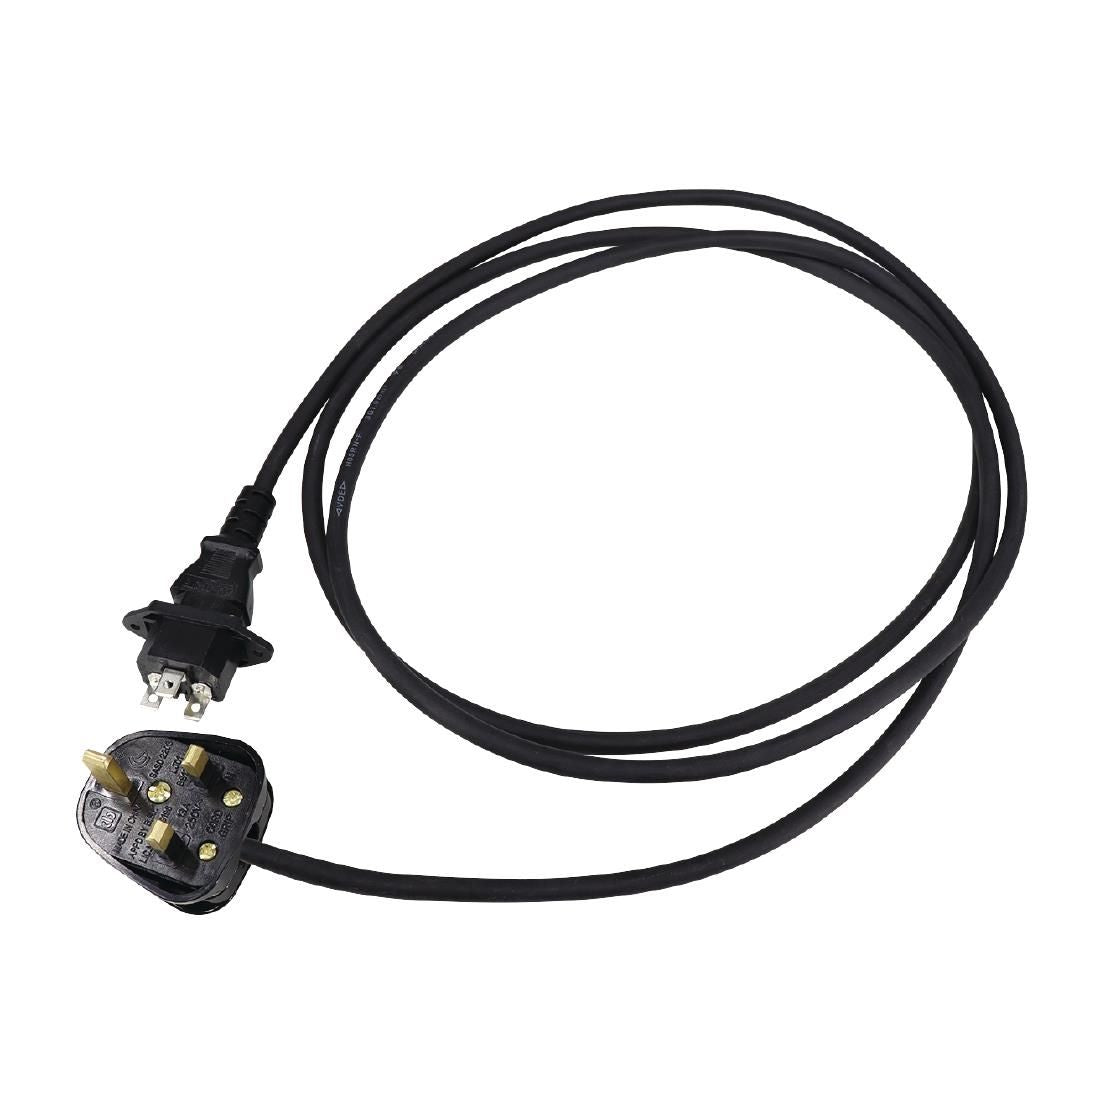 AJ538 Buffalo Power Cord Assembly for CD232 JD Catering Equipment Solutions Ltd